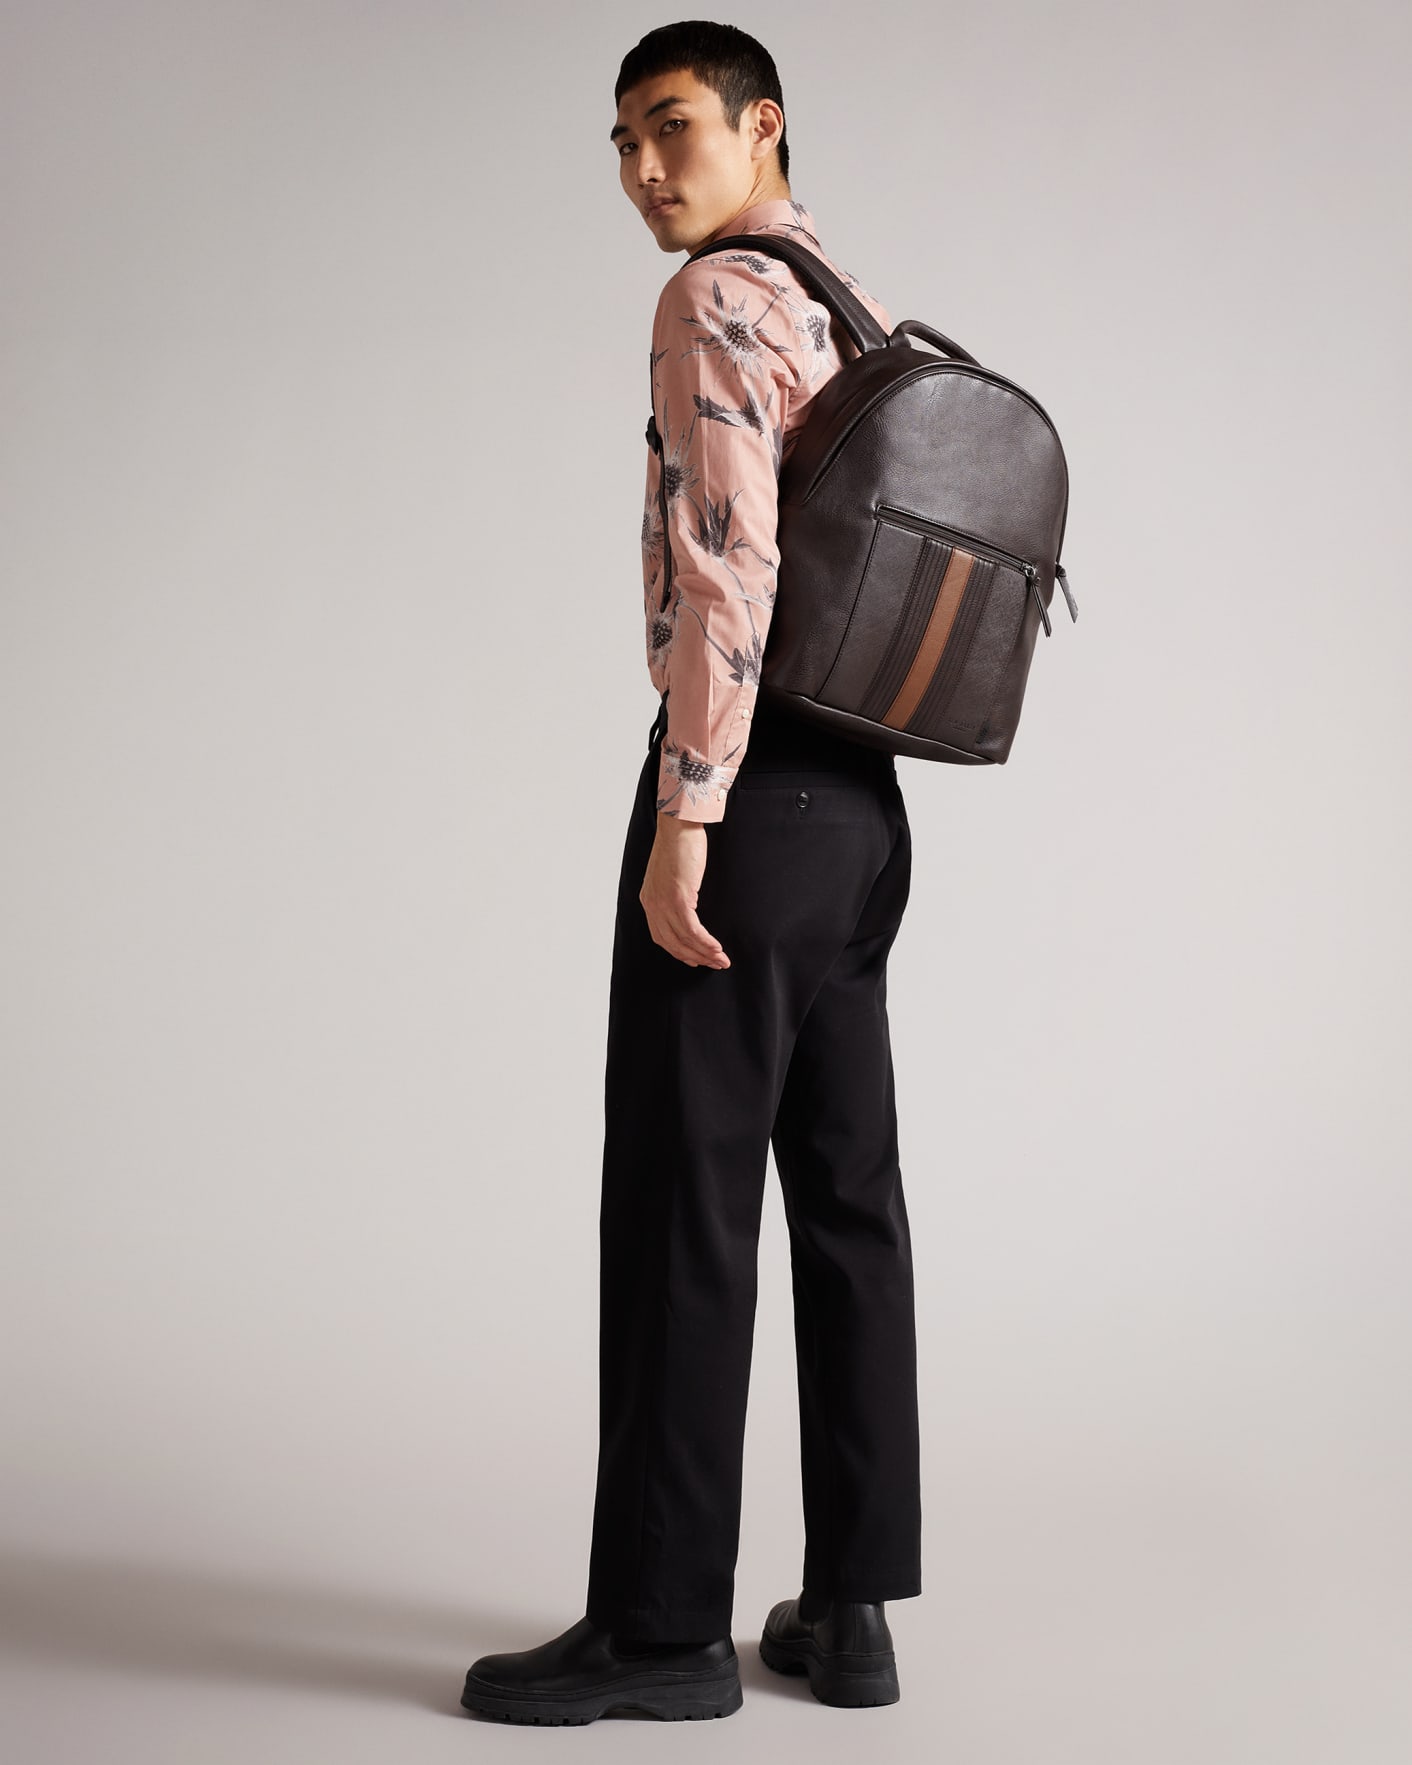 Brown-Chocolate Striped PU Backpack Ted Baker